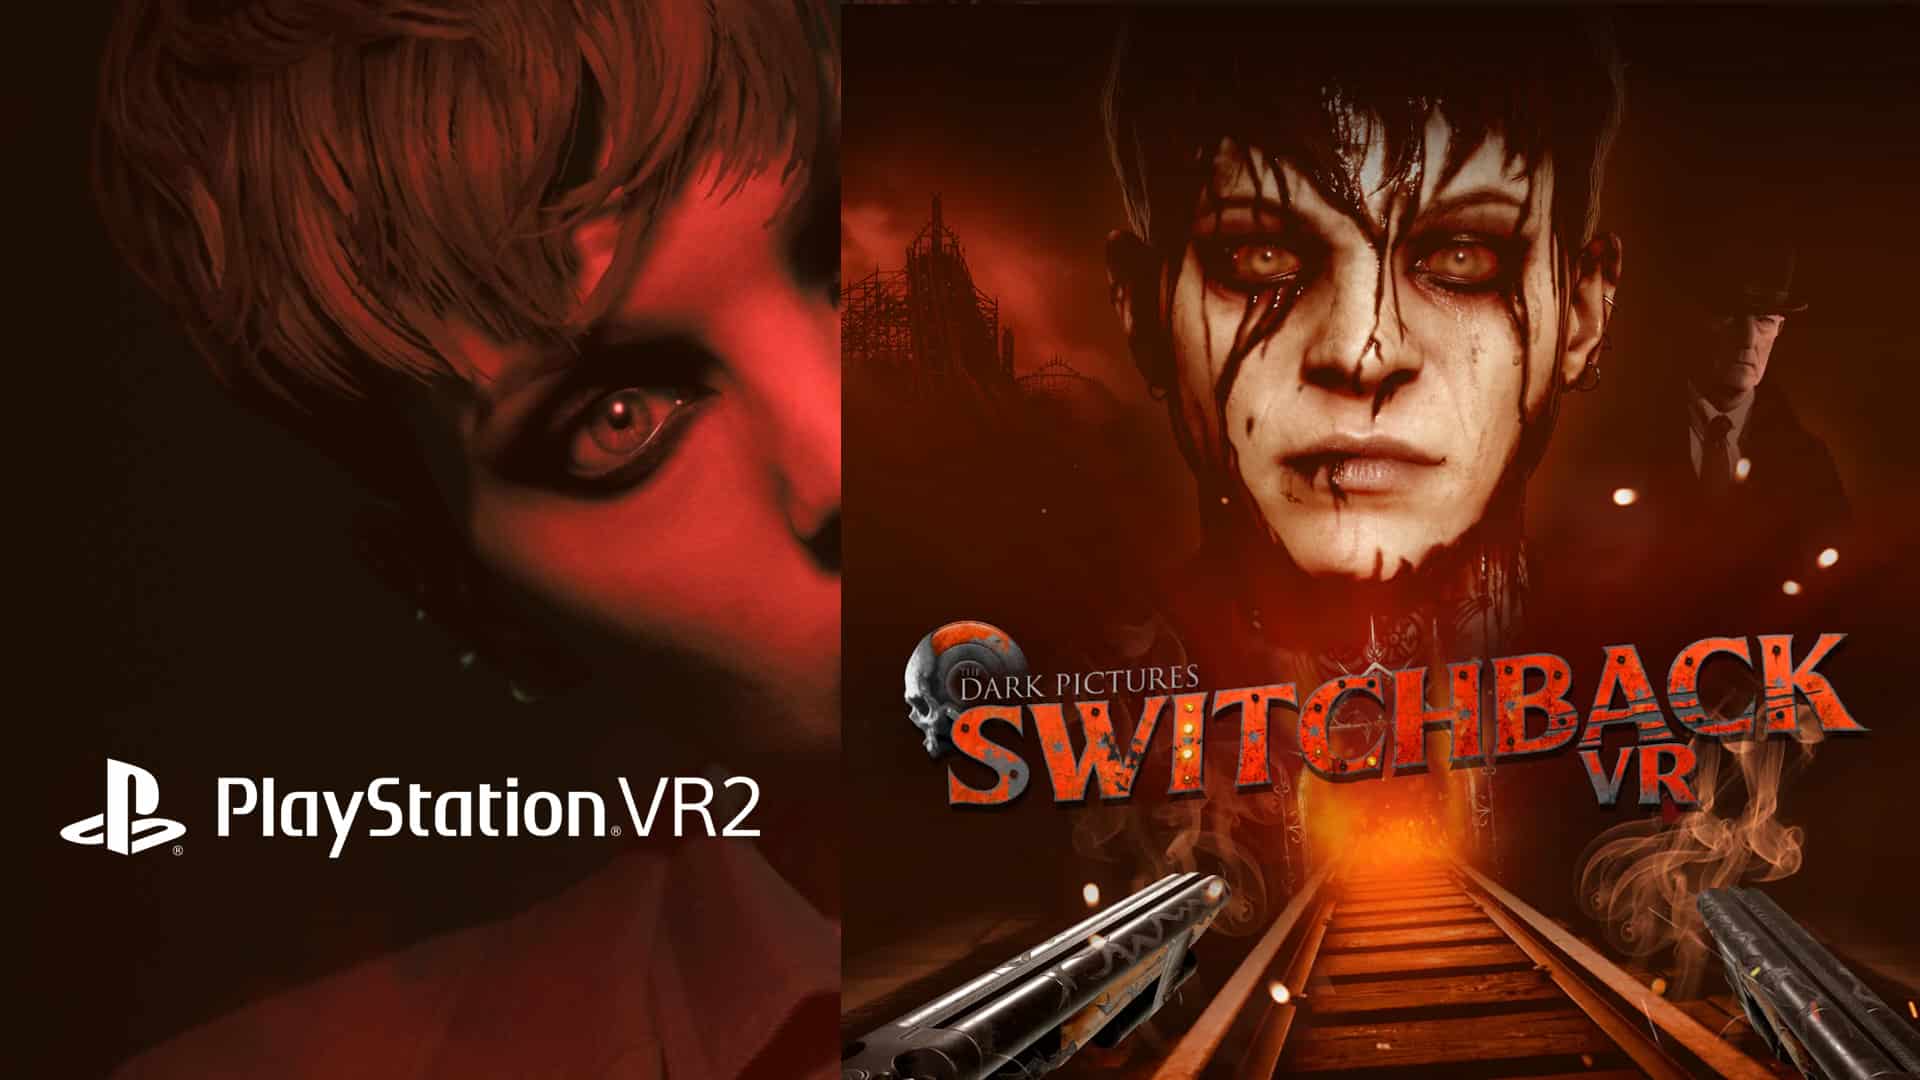 The Dark Pictures: Switchback VR Collectibles